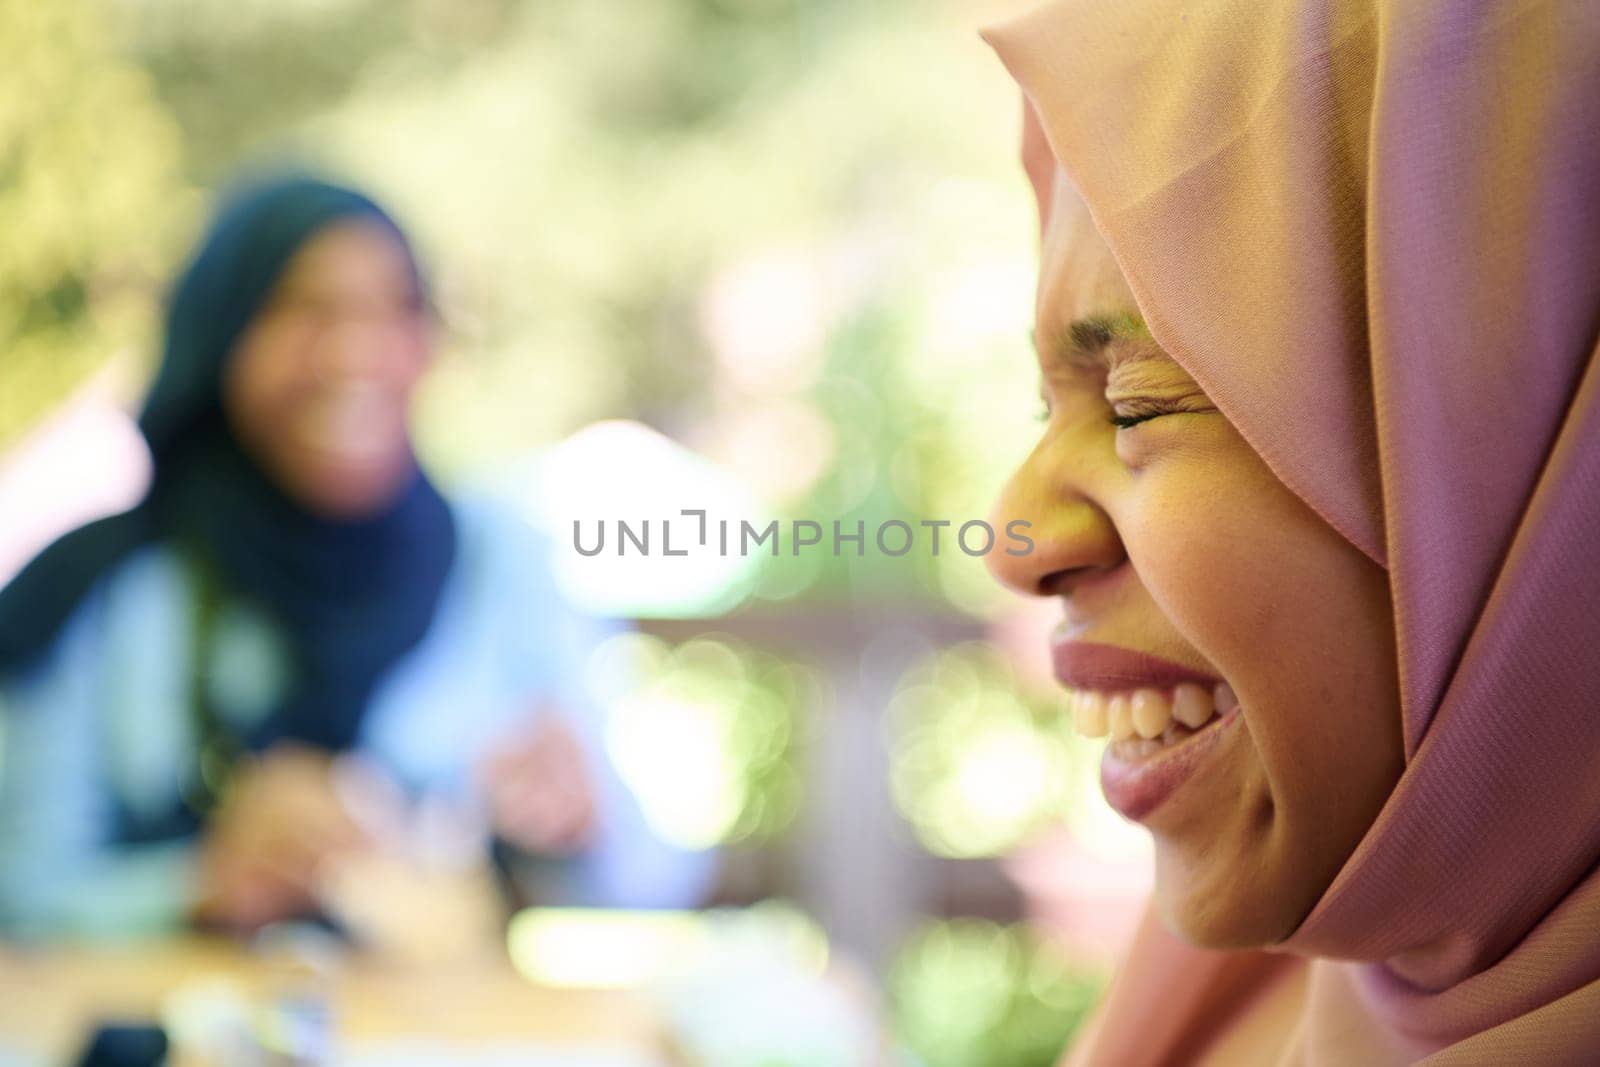 A Middle Eastern girl wearing a hijab, with a bright smile and a pink headscarf, captured in a close-up portrait exuding joy and positivity.